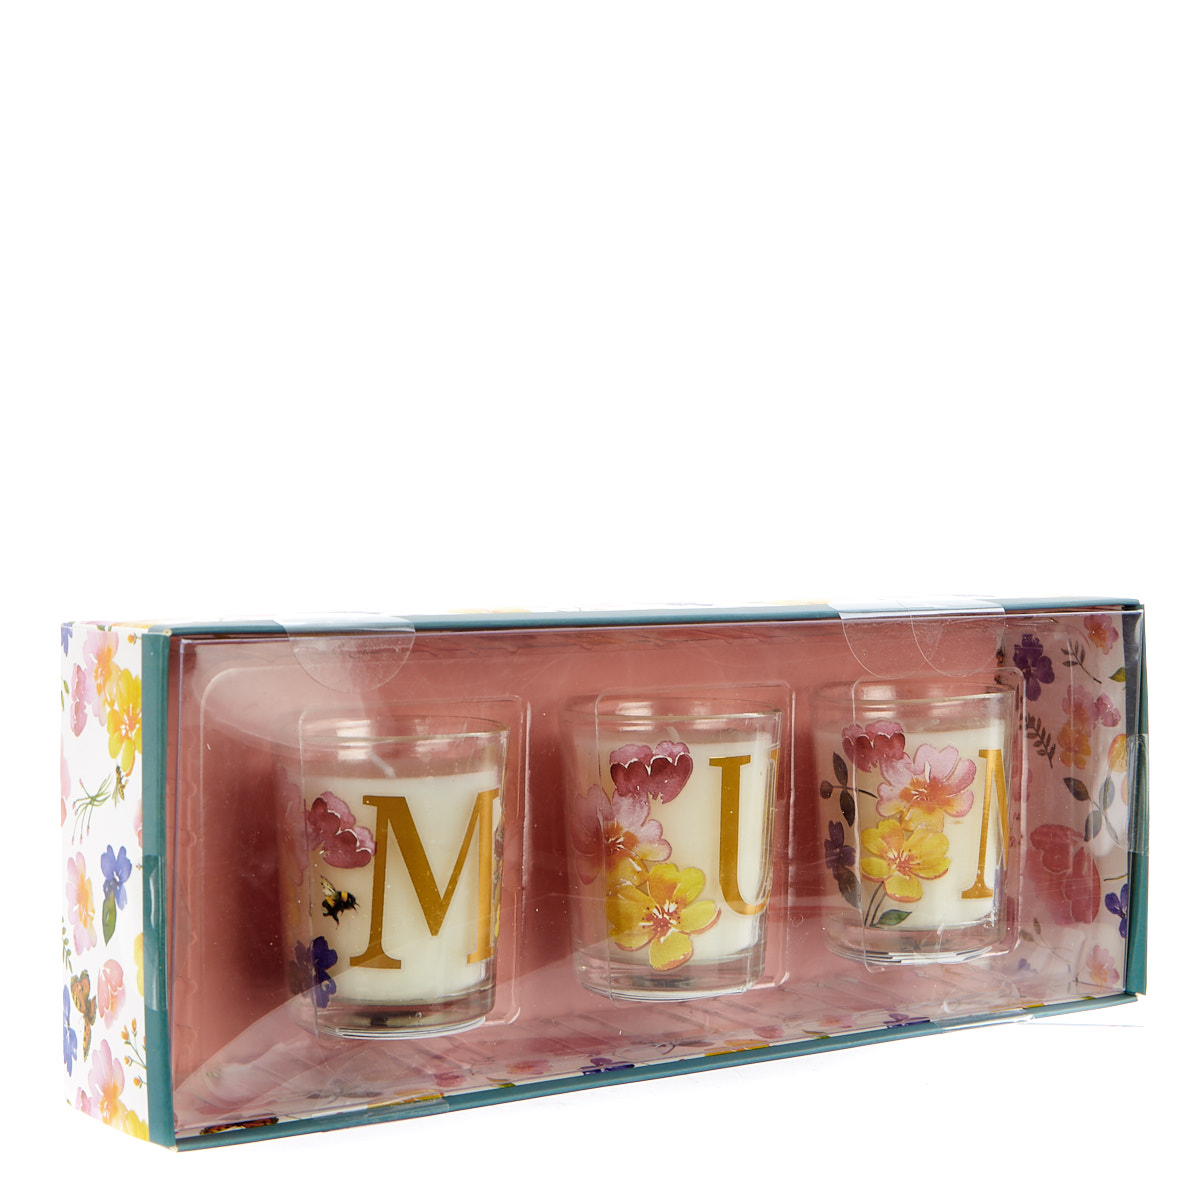 Floral Scented Mother's Day Candles - Set of 3